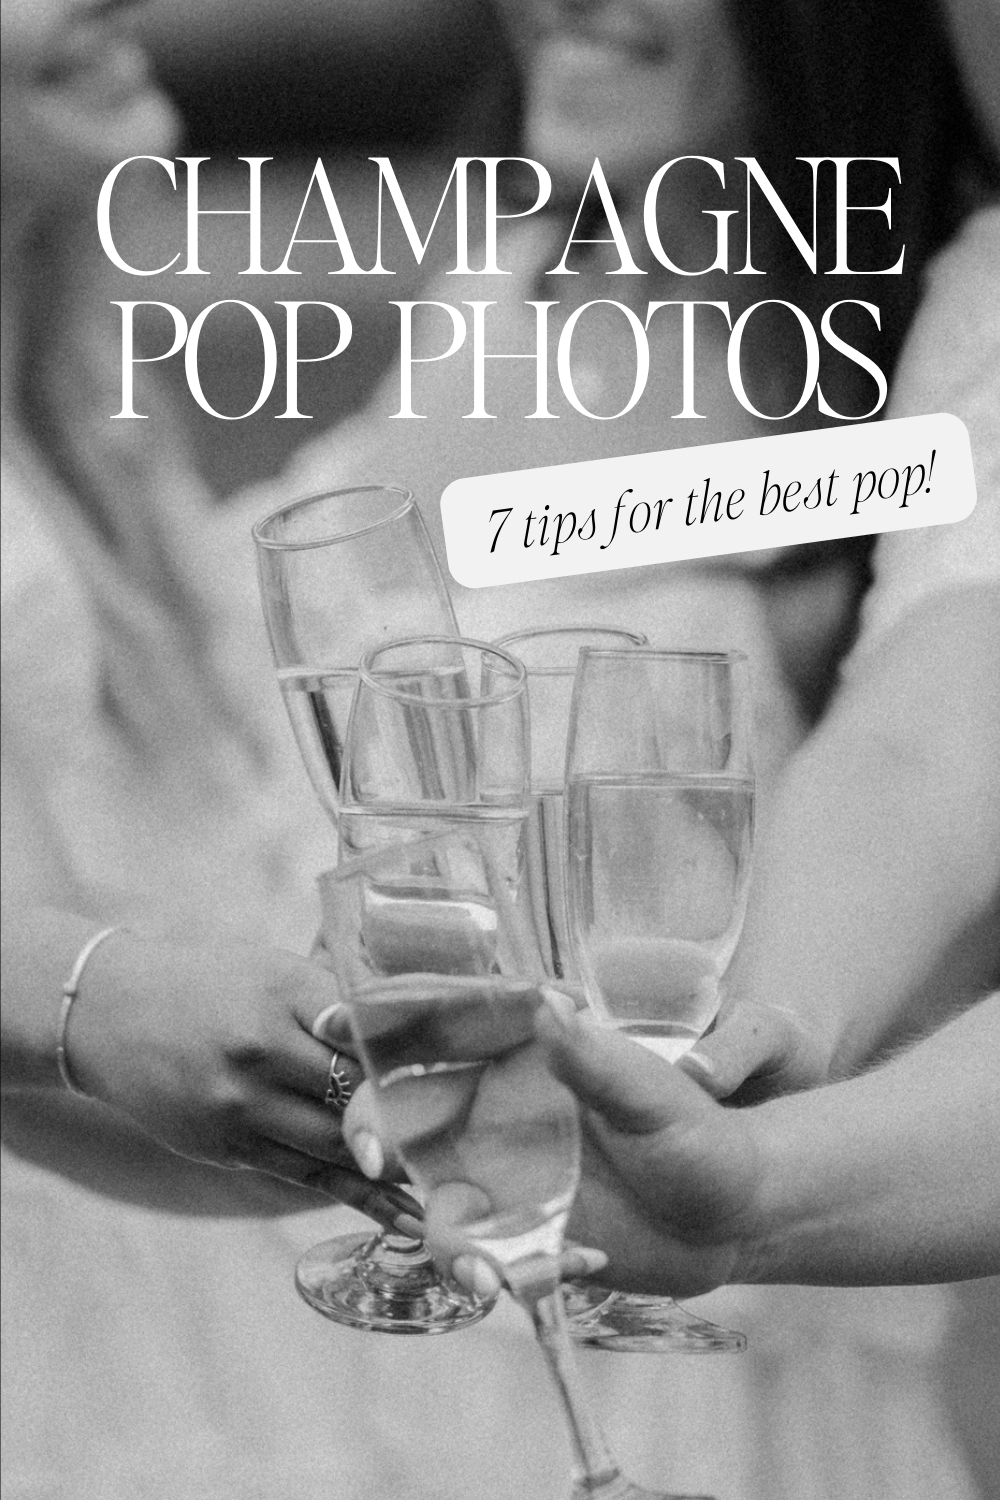 Champage pop photos - 7 tips for the best pop!